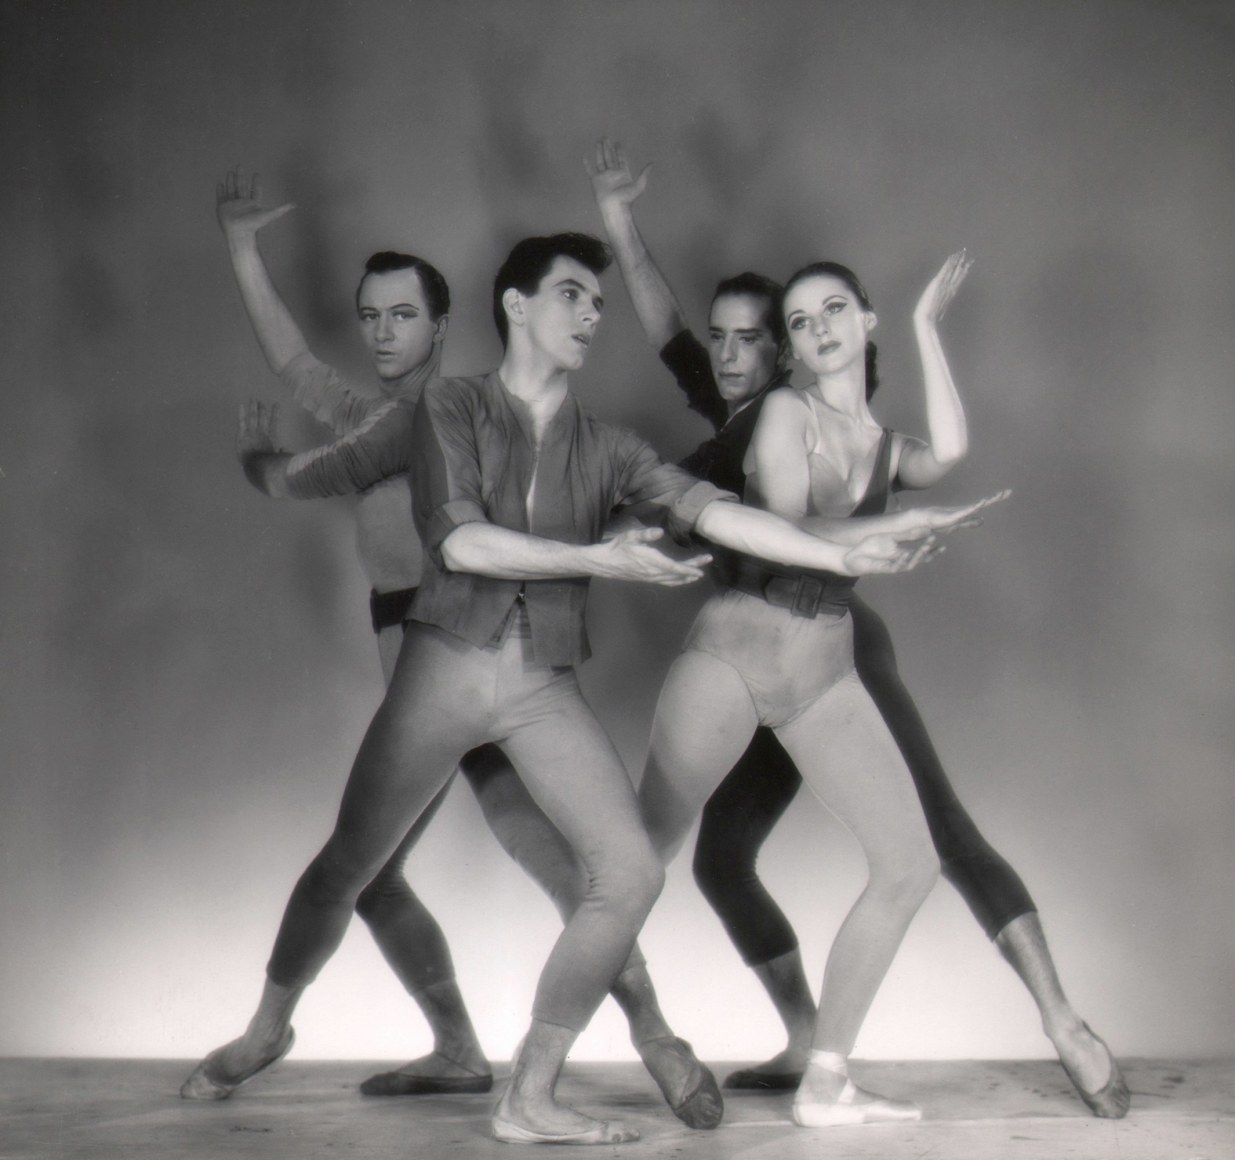 George Platt Lynes, Age of Anxiety: Todd Bolender, Roy Tobias, Jerome Robbins, Tanaquil LeClercq, ​1950. Four dancers pose, two in front and two behind, with arms and legs in various directions.